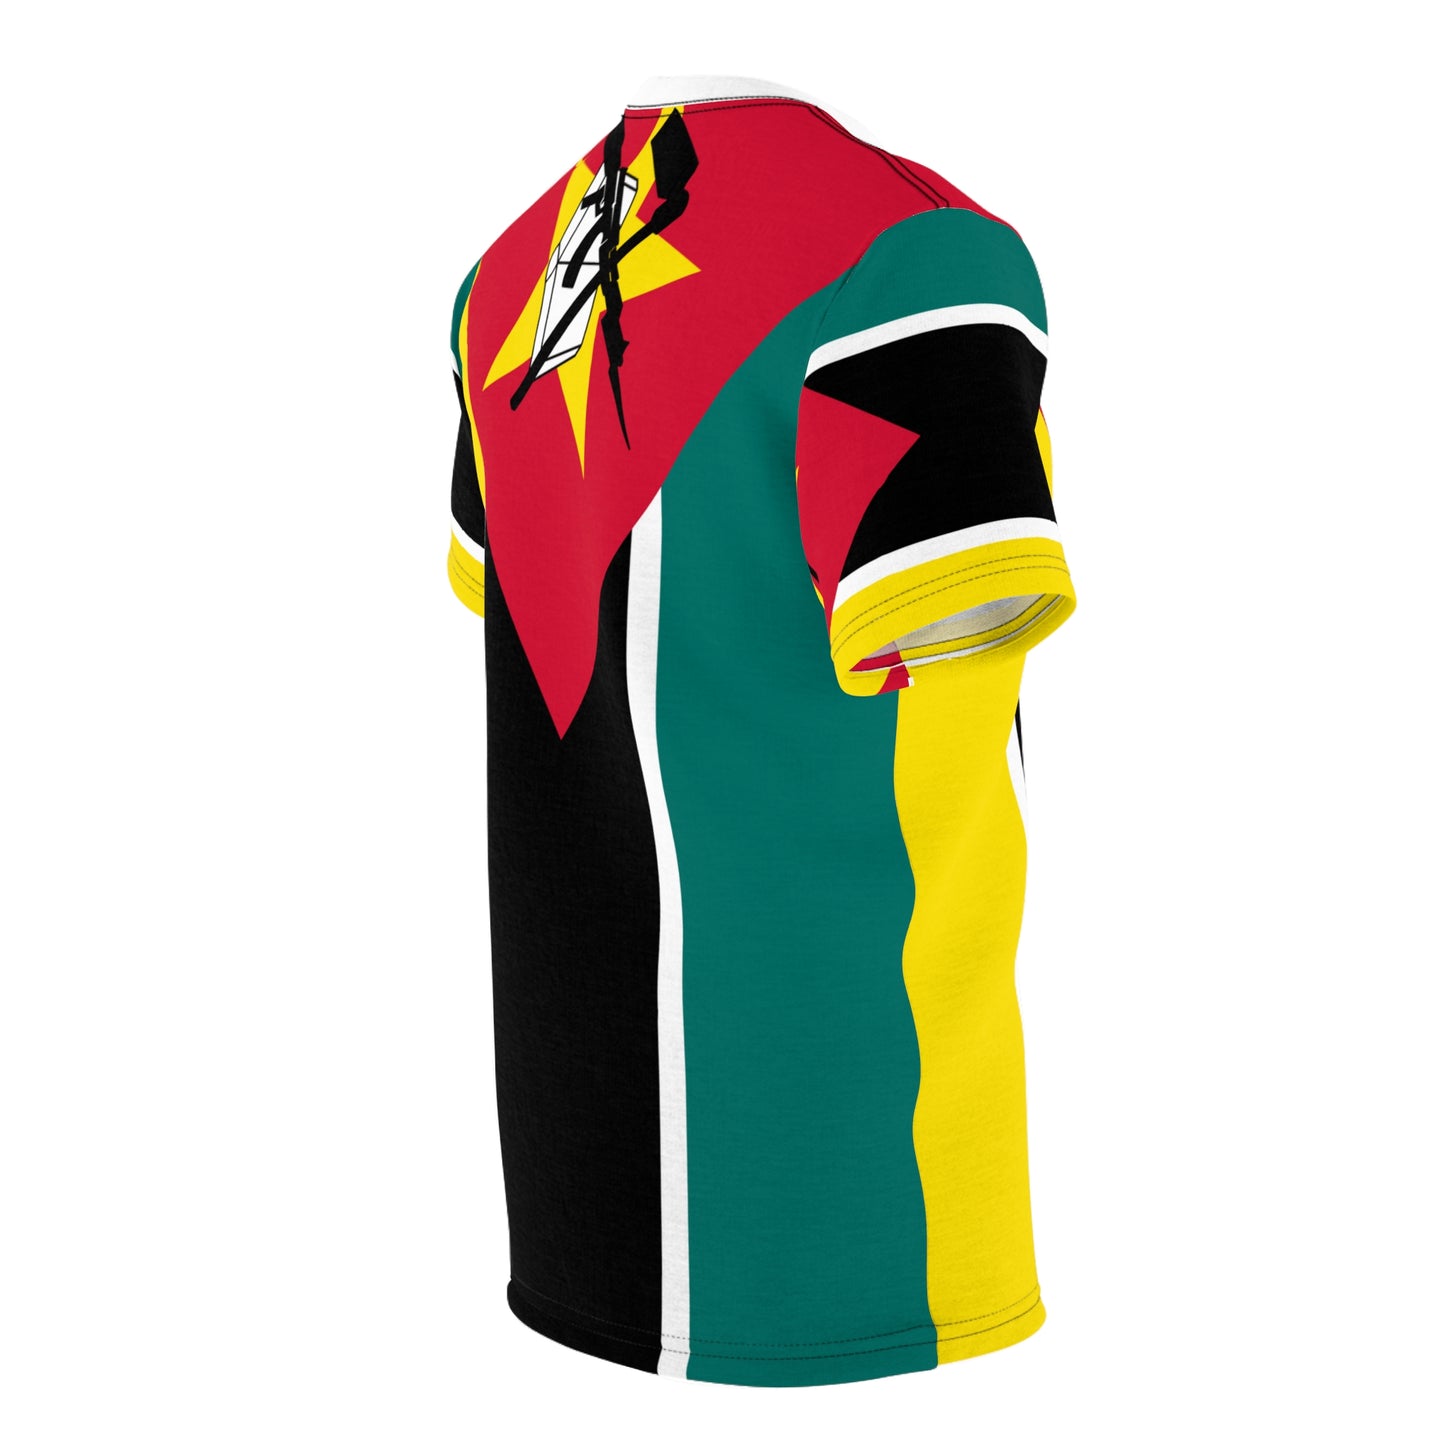 Mozambique Flag - International Country Flag Unisex Tee